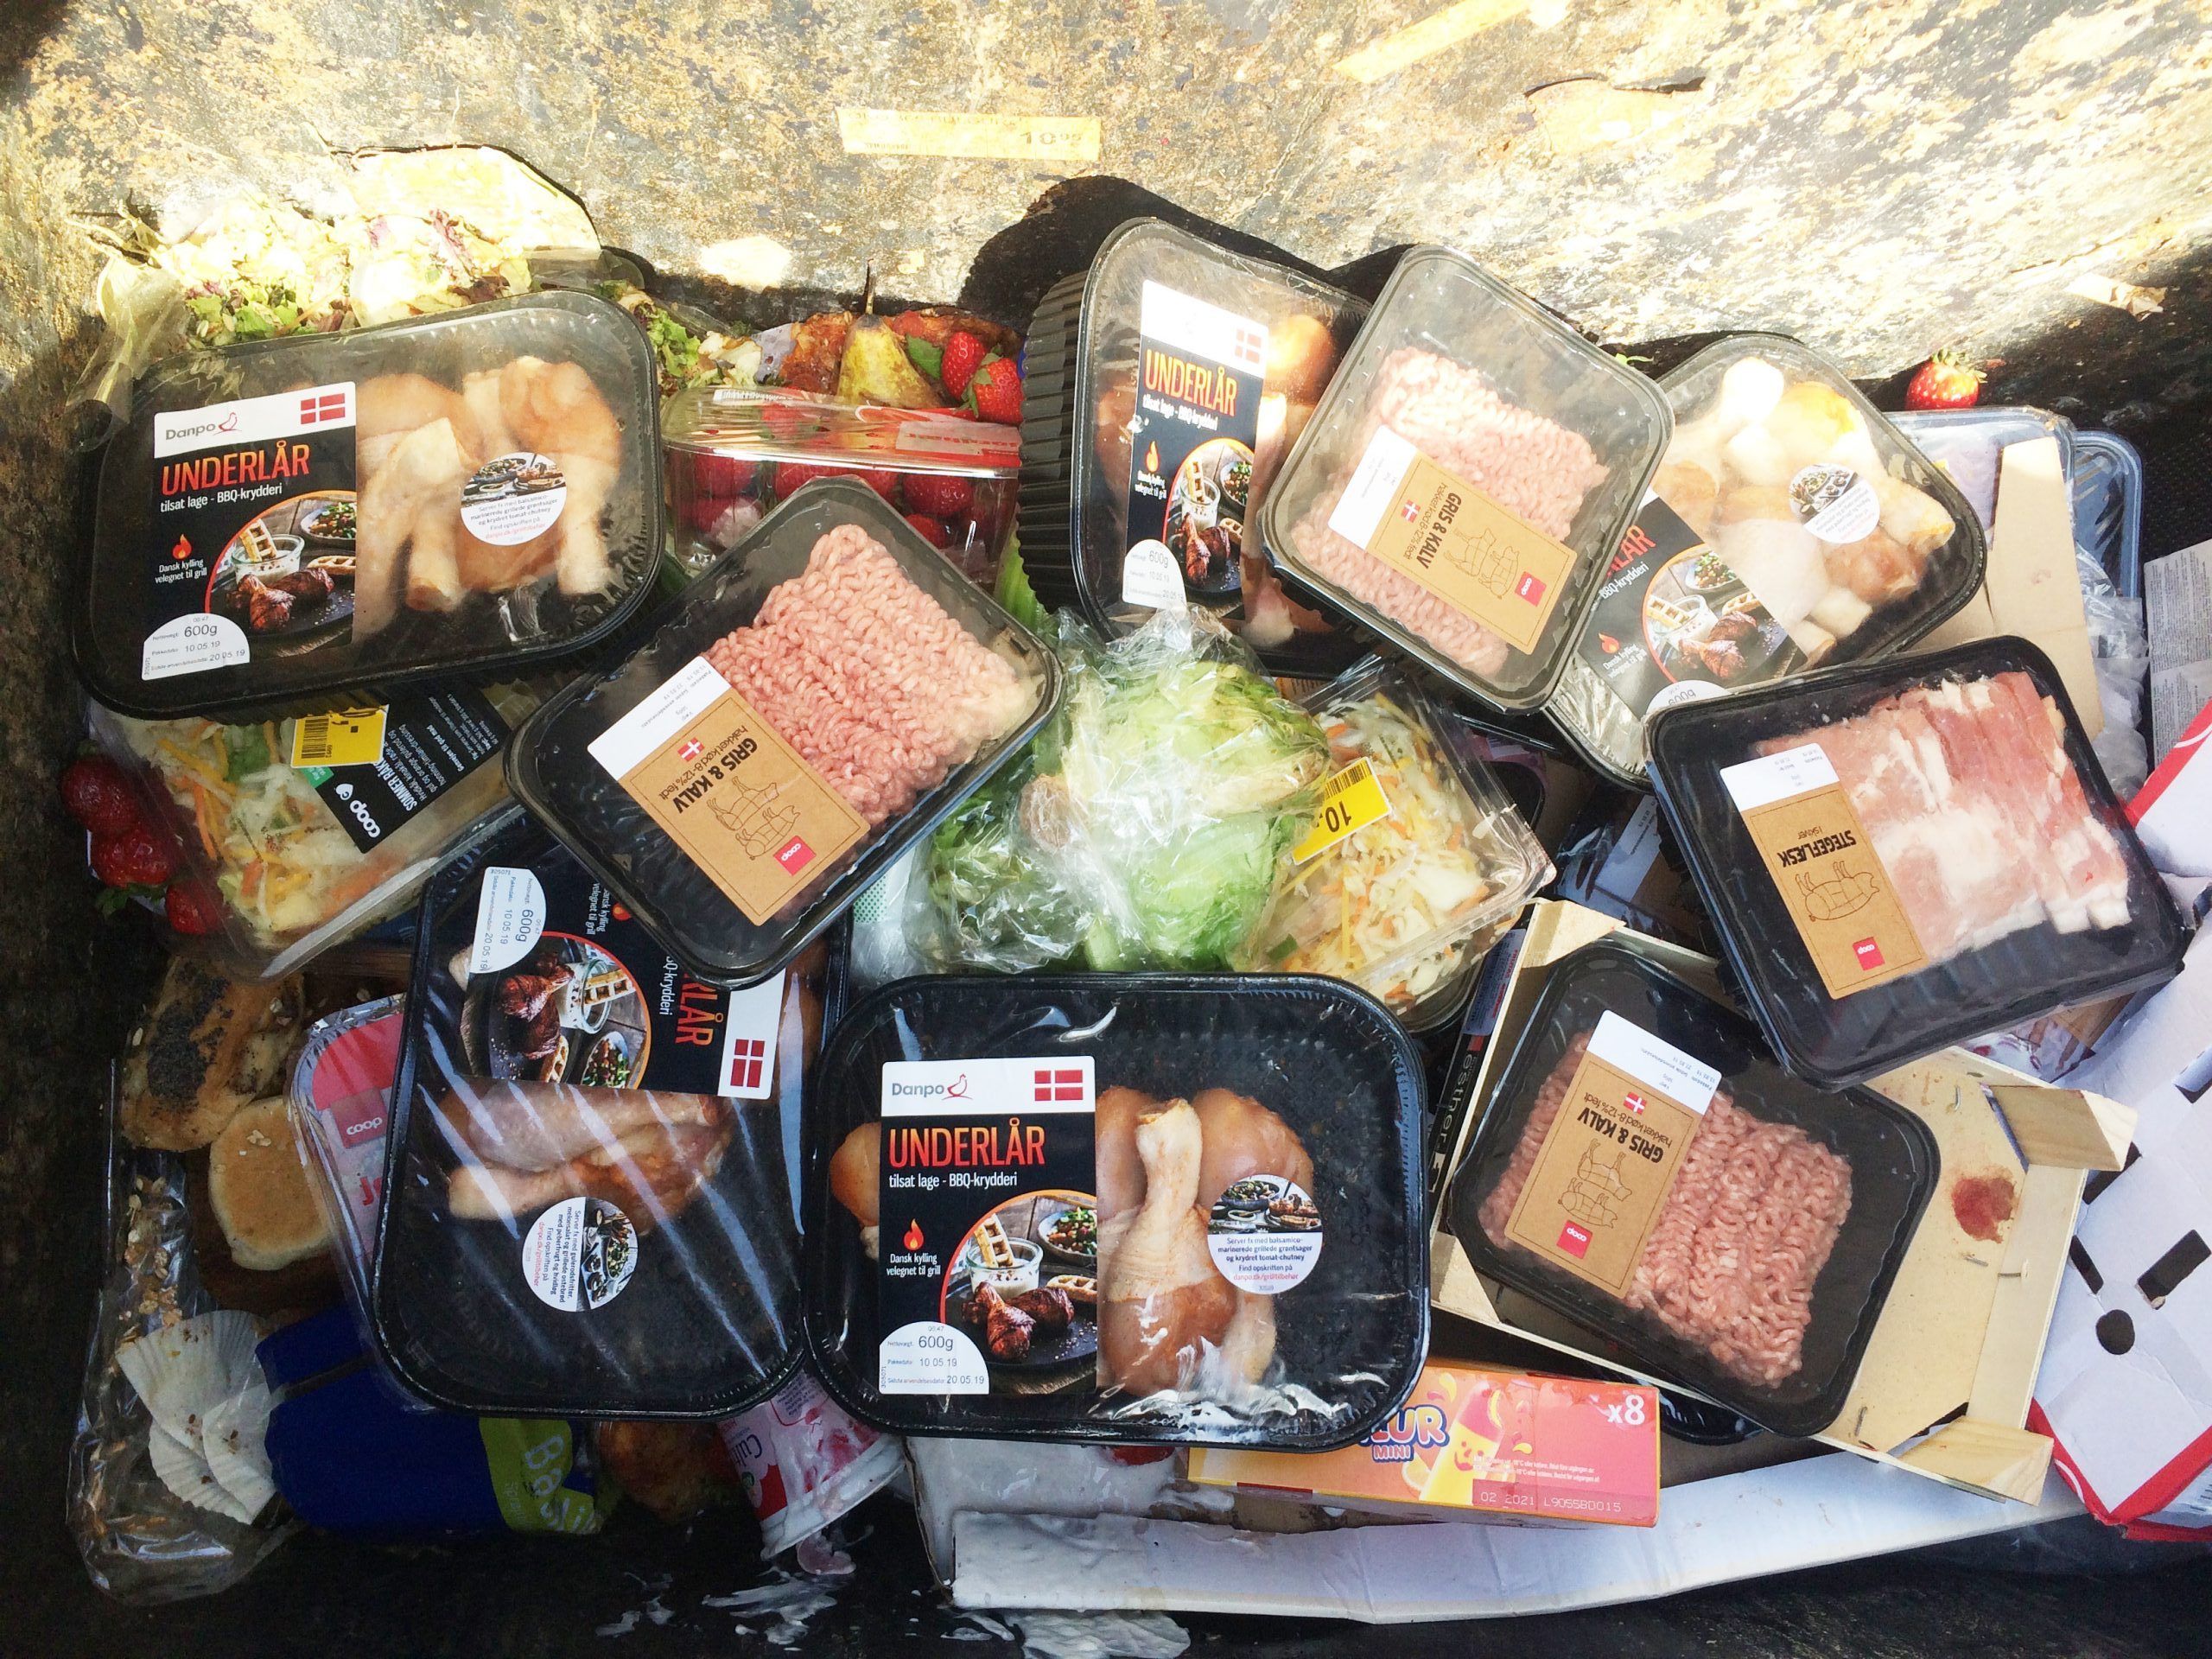 Expat in shock at dumpsters full of perfect food in ‘world’s greenest city’